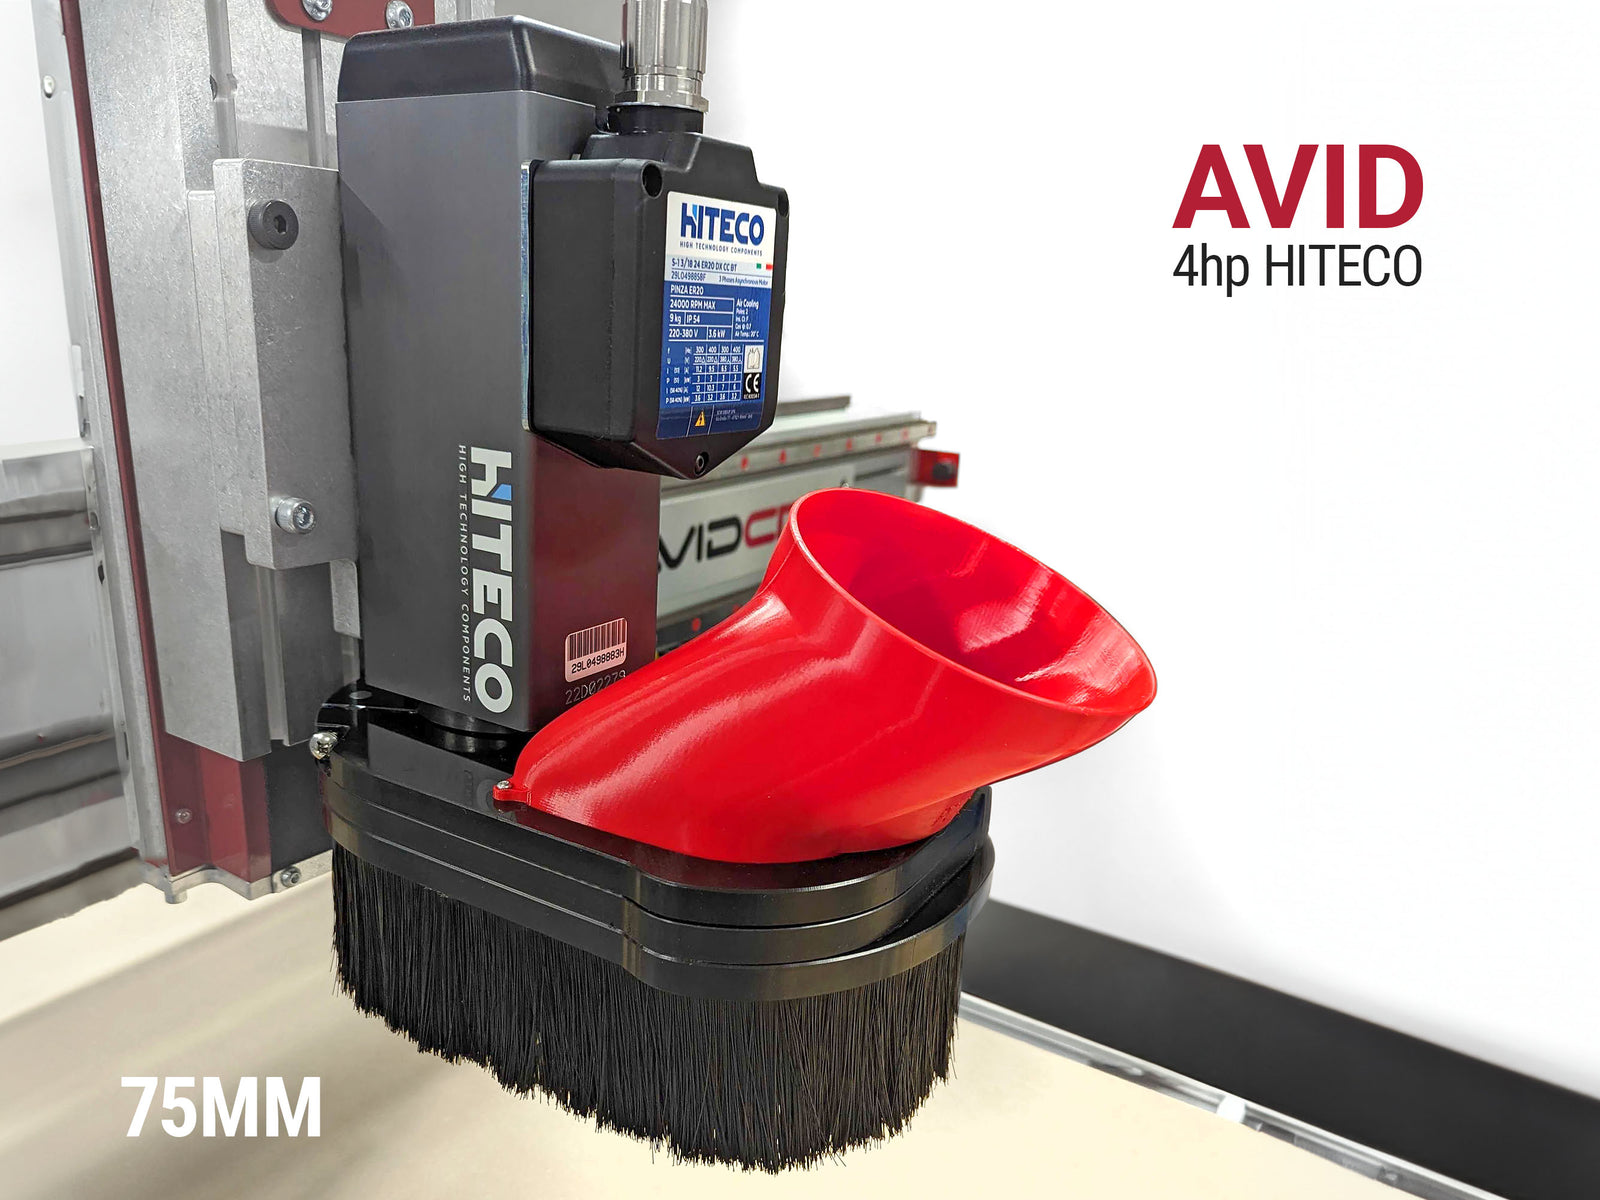 Dust Boot for Avid CNC Router with Hiteco 4hp Spindle